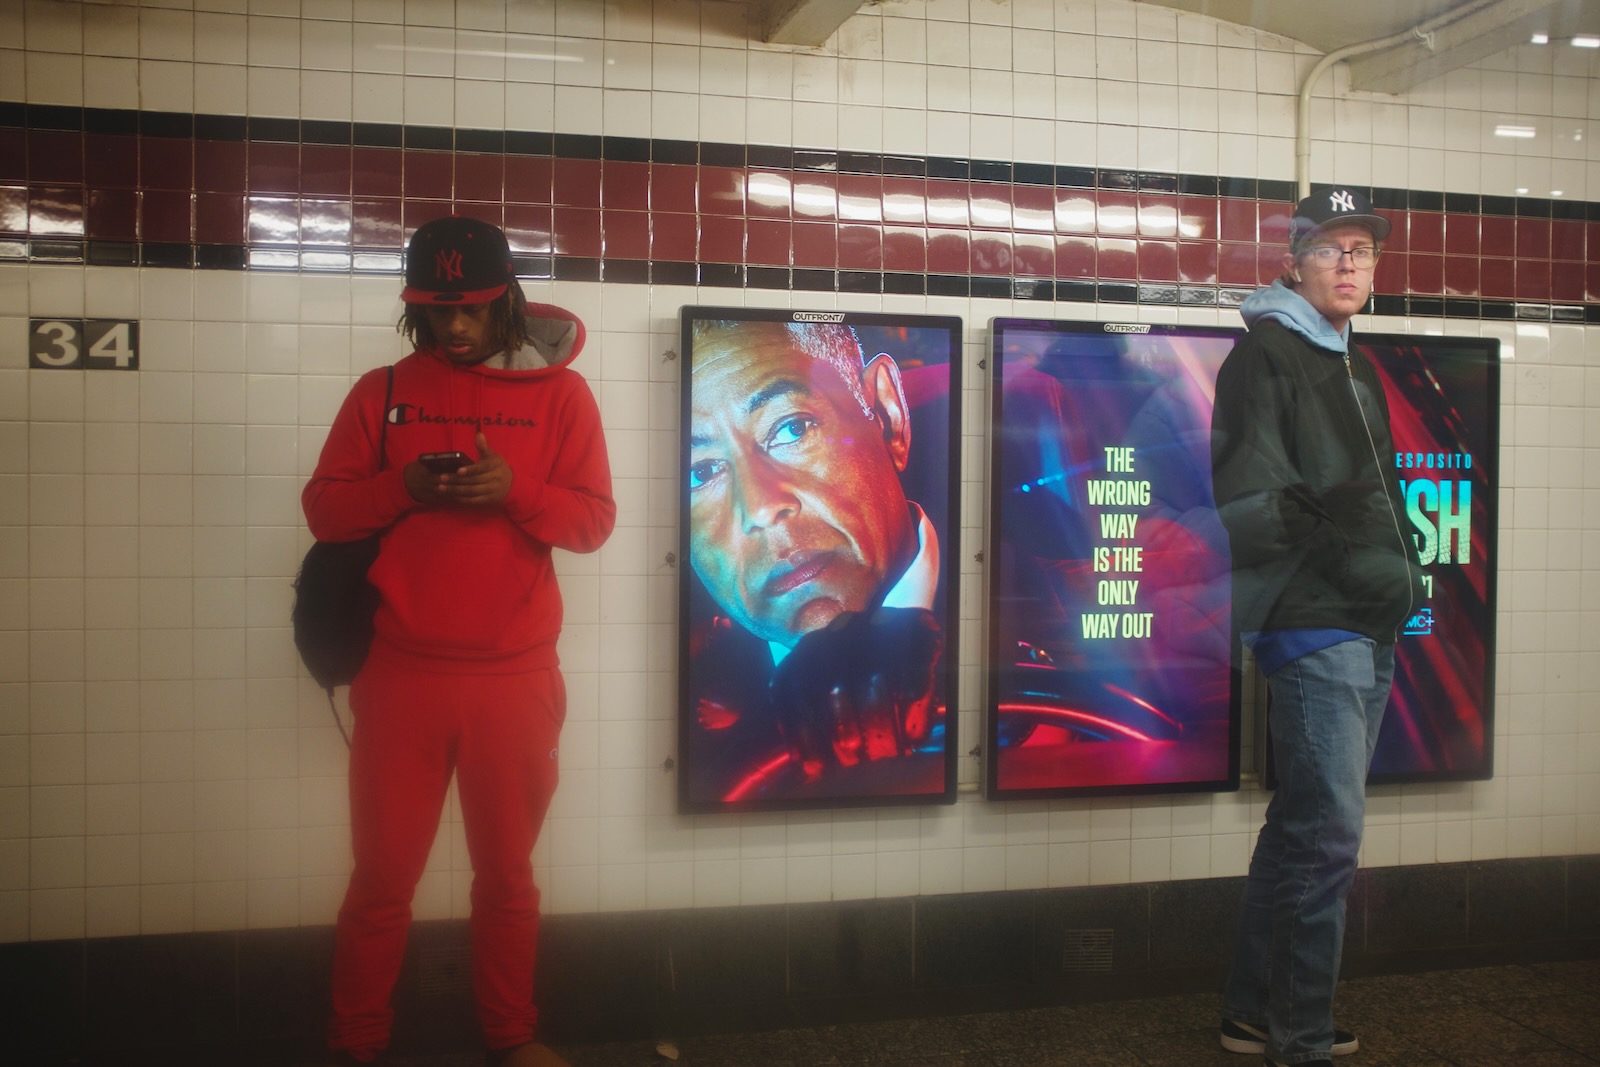 Two men on a subway platform, shot from inside a subway car. The man on the left wears a red hoodie and a black and red Yankees cap. The man on the right wears a traditional blue and white Yankees cap.”